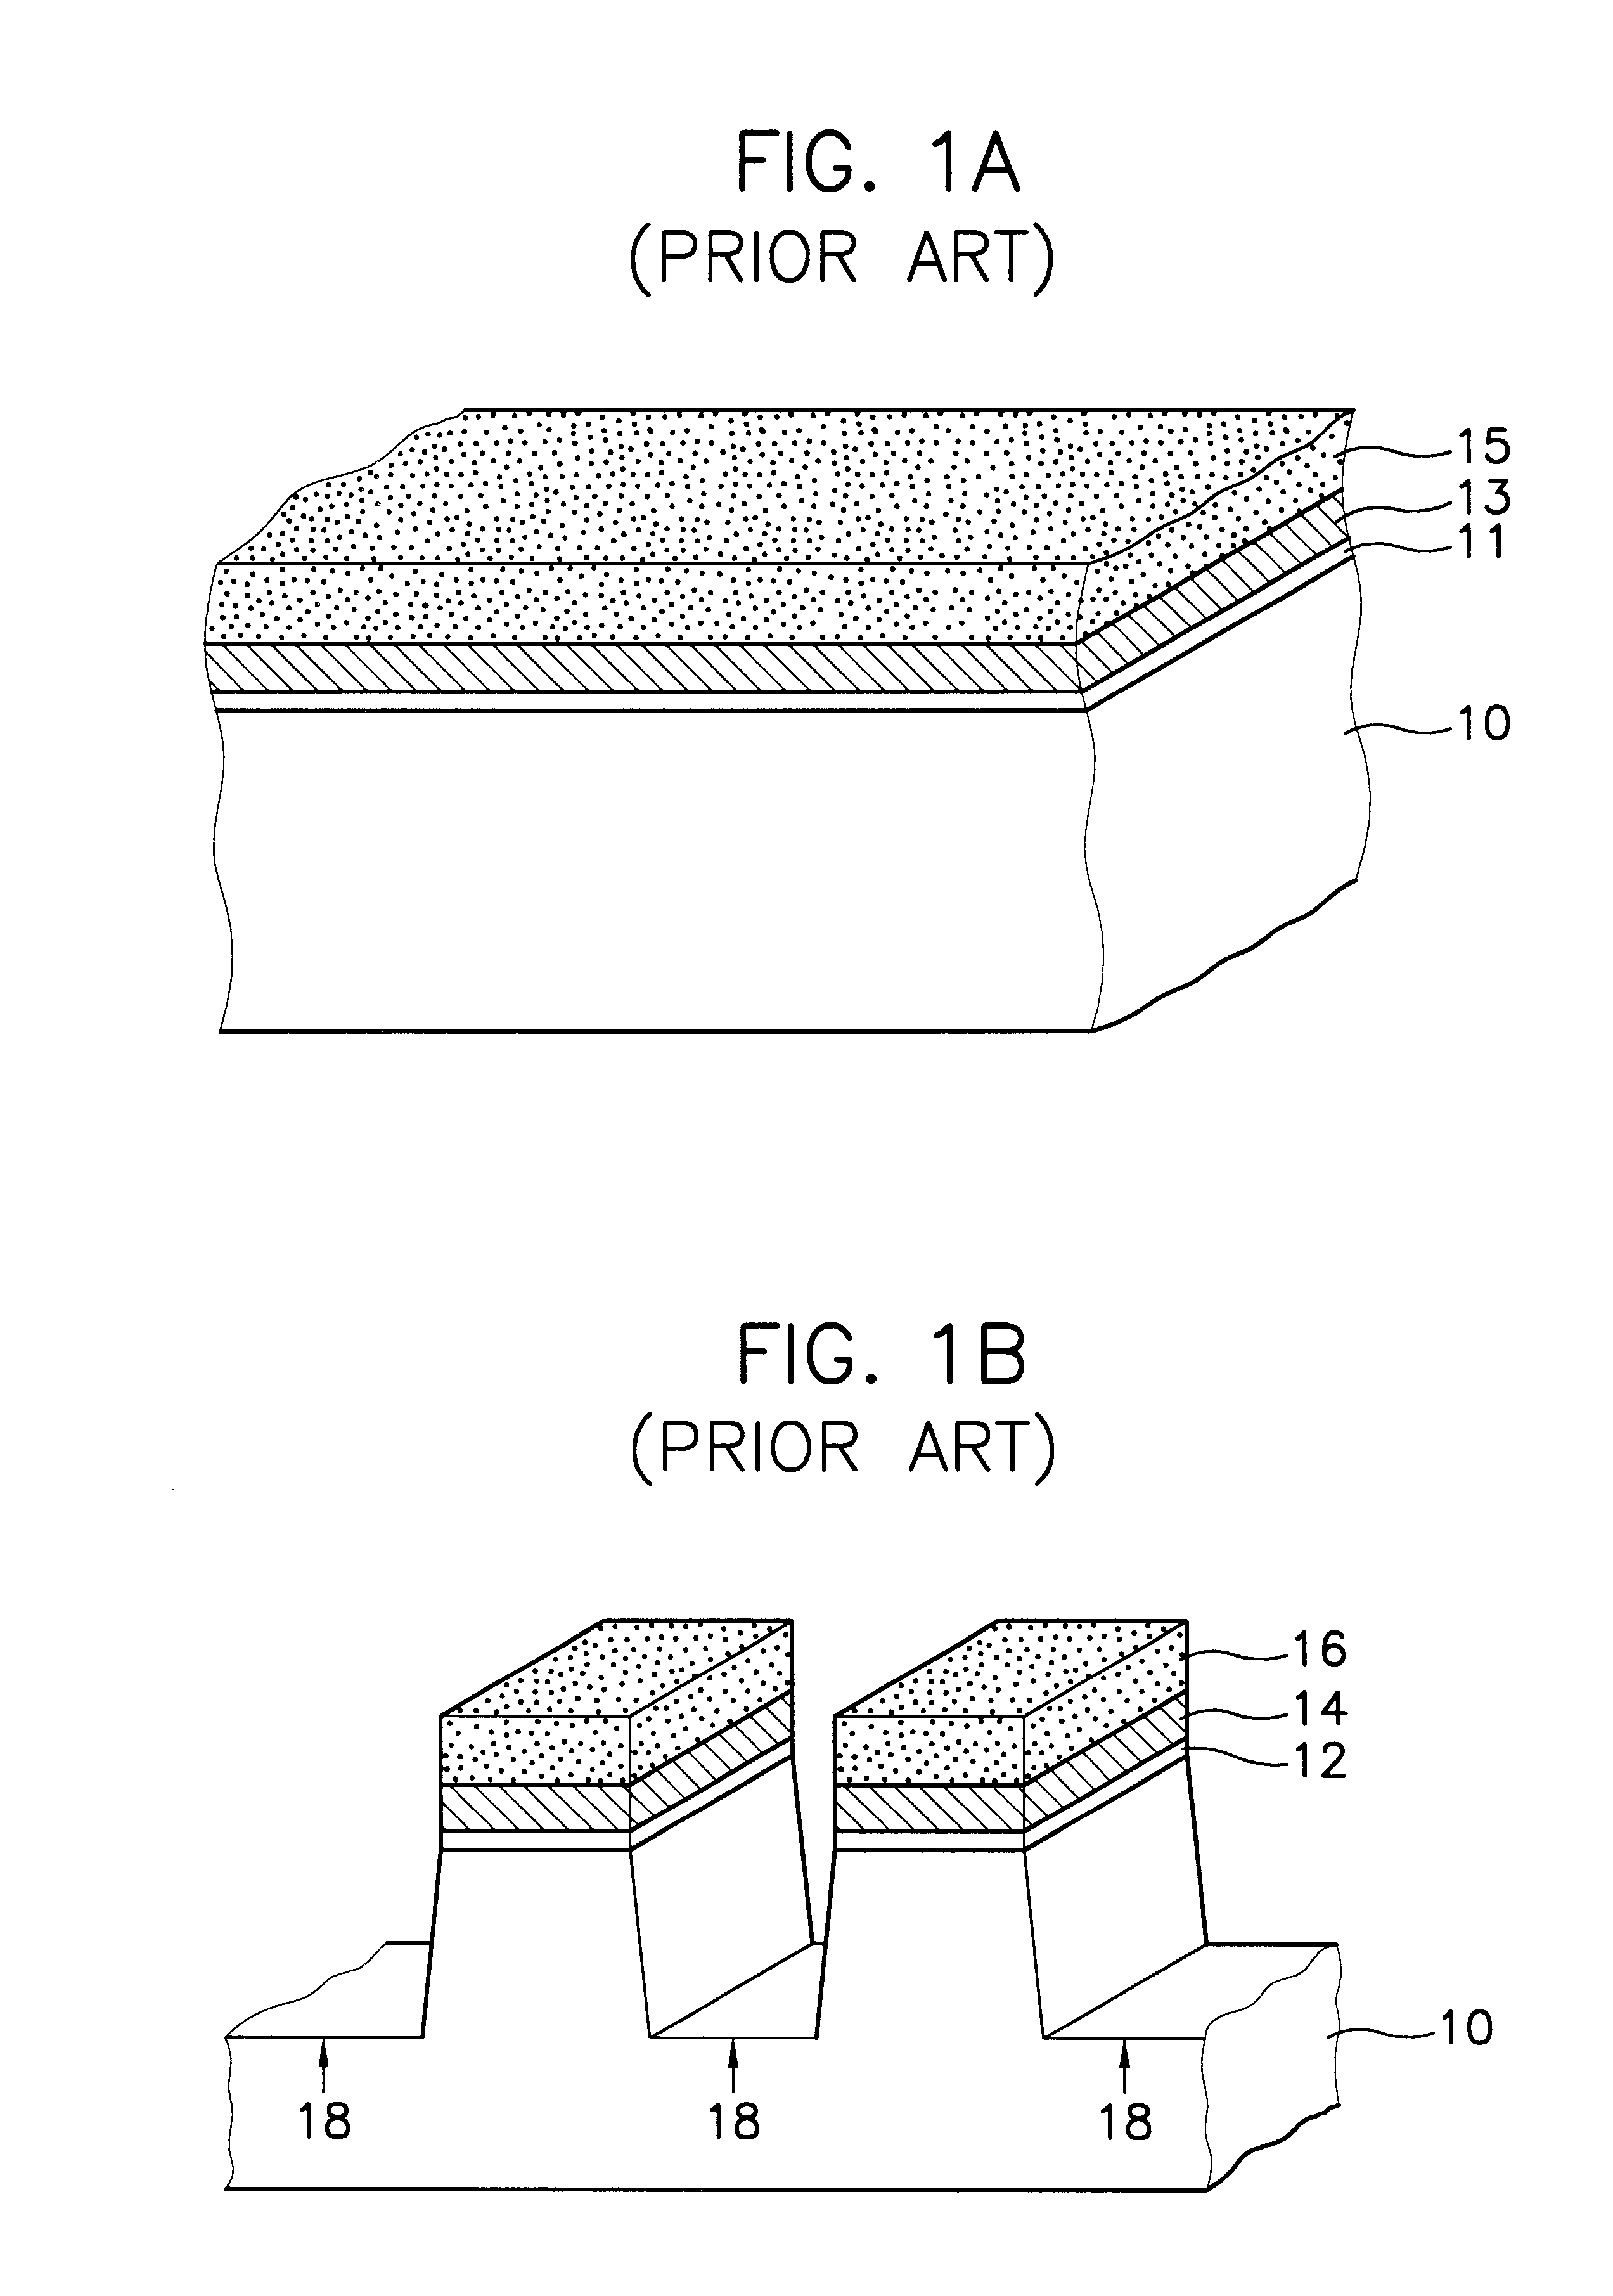 Semiconductor device having desired gate profile and method of making the same